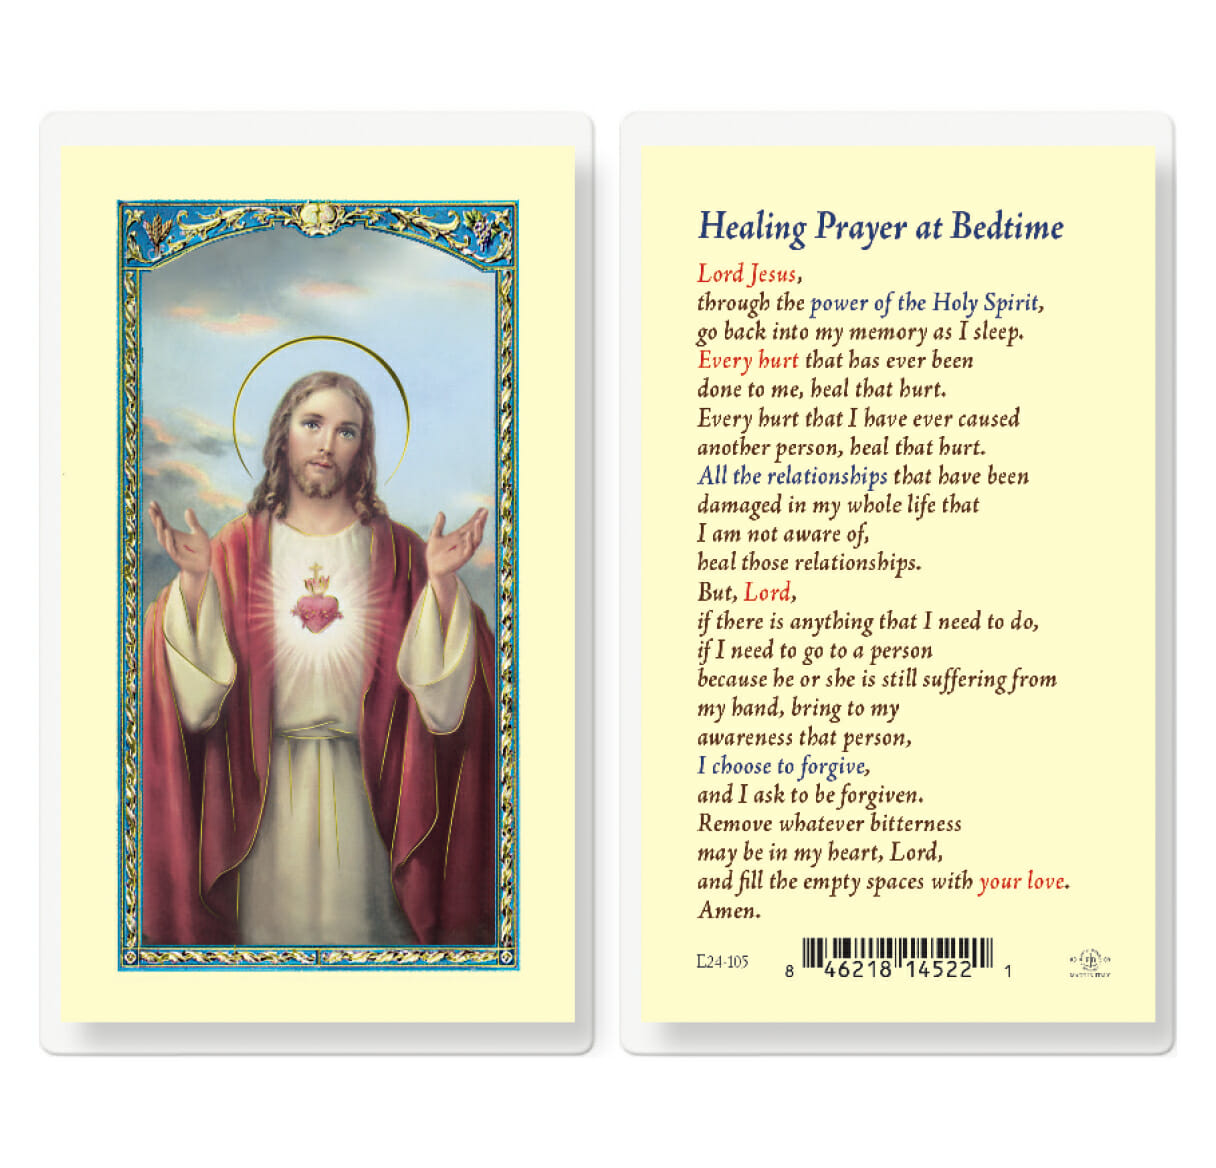 healing-prayer-at-bedtime-laminated-holy-card-25-pack-buy-religious